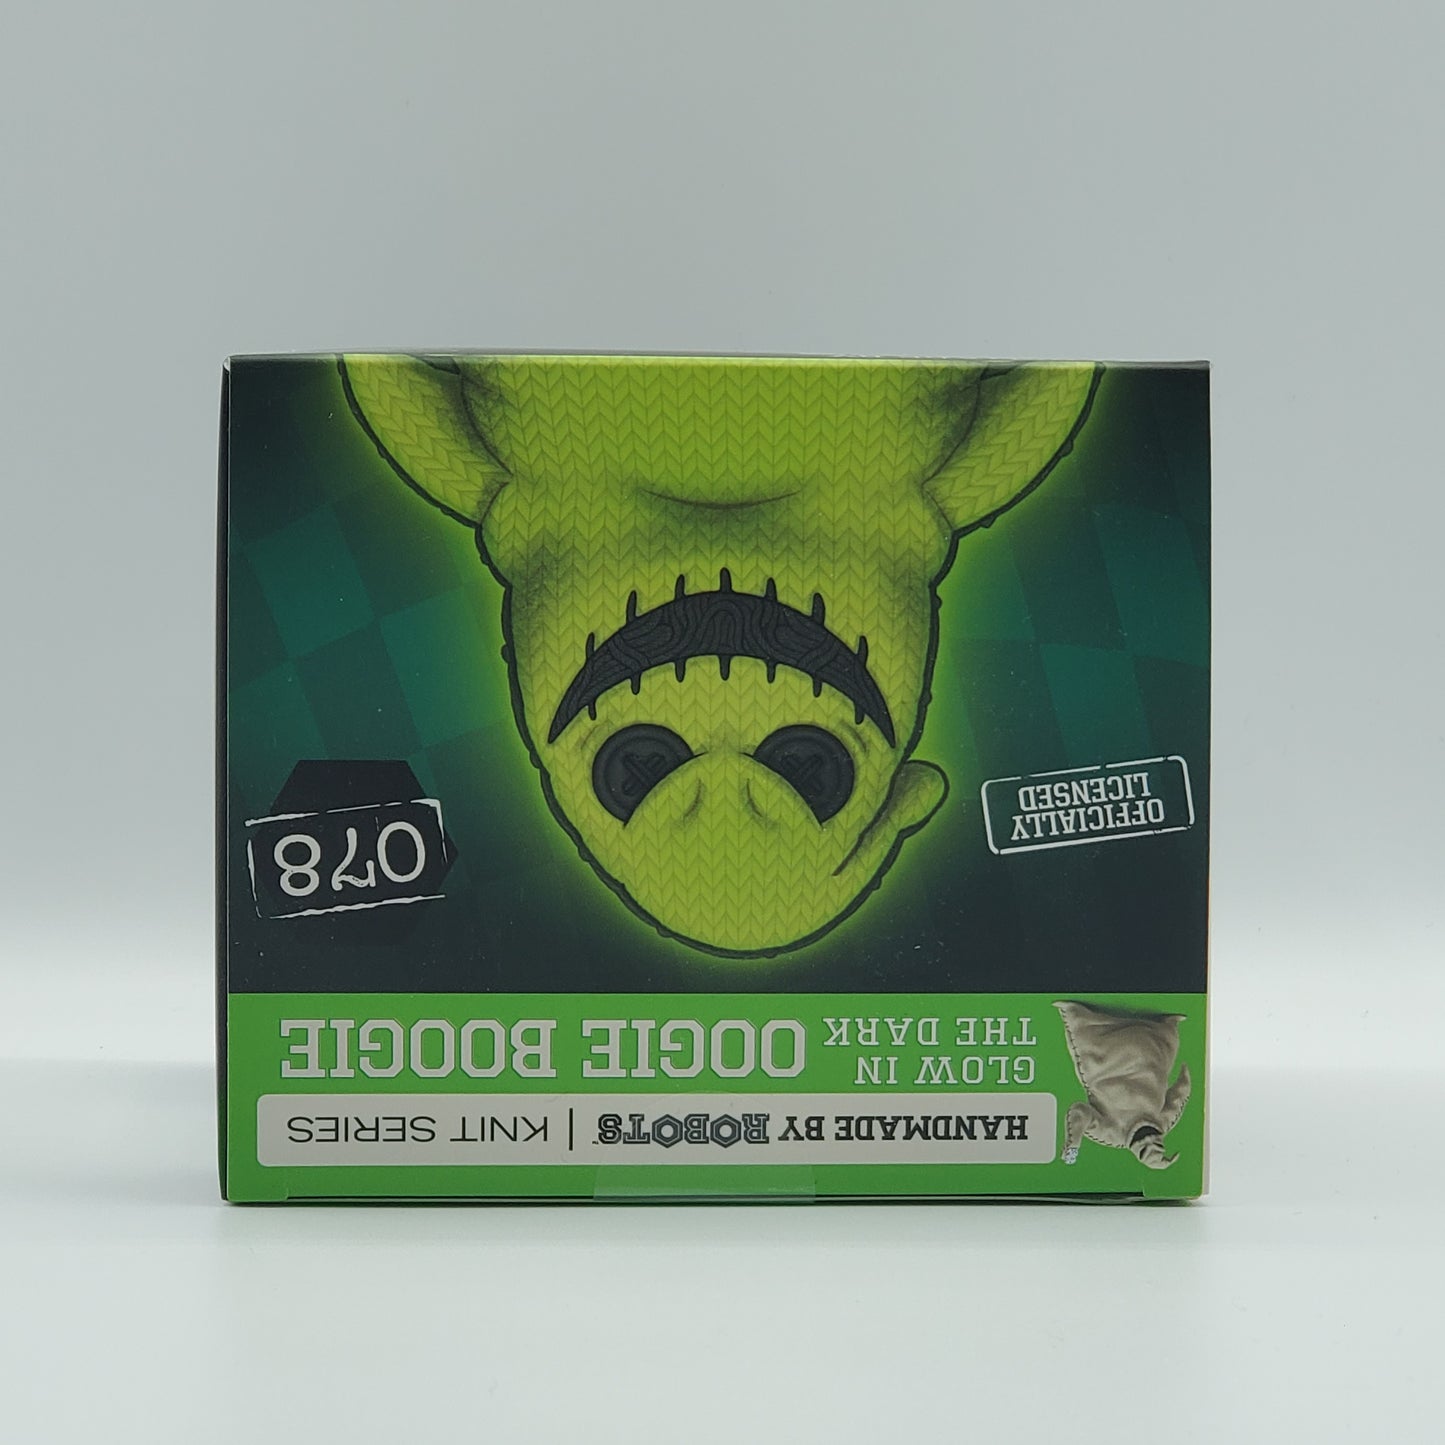 HANDMADE BY ROBOTS - OOGIE BOOGIE - GLOW IN THE DARK - LIMITED EDITION - GAMESTOP EXCLUSIVE